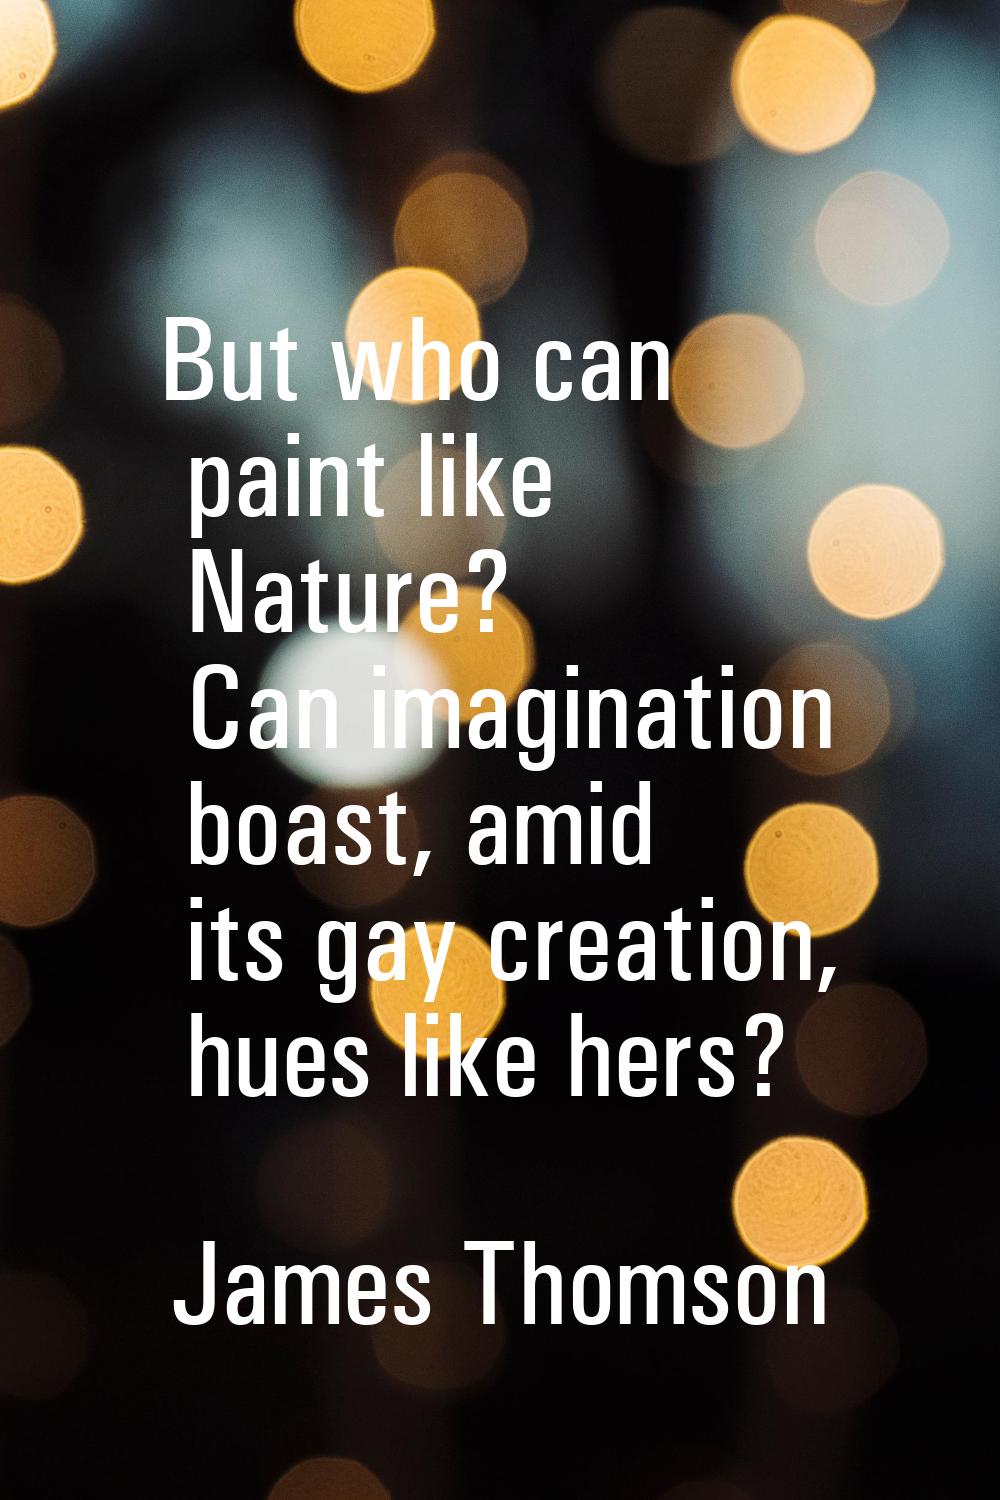 But who can paint like Nature? Can imagination boast, amid its gay creation, hues like hers?